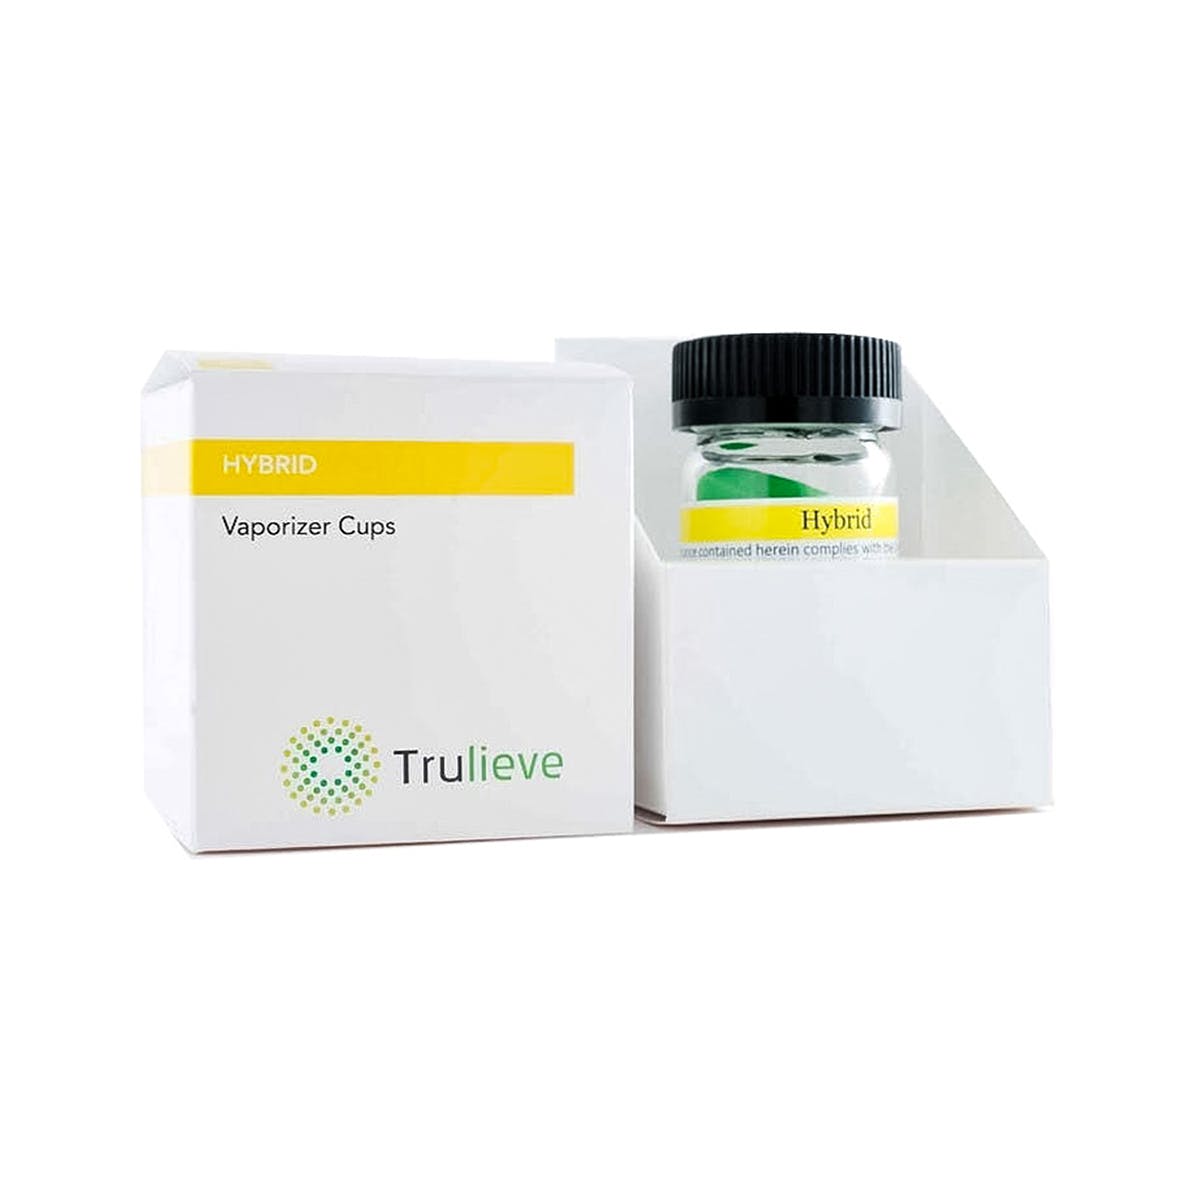 marijuana-dispensaries-trulieve-clearwater-in-clearwater-vaporizer-cup-4-pack-hybrid-gsc